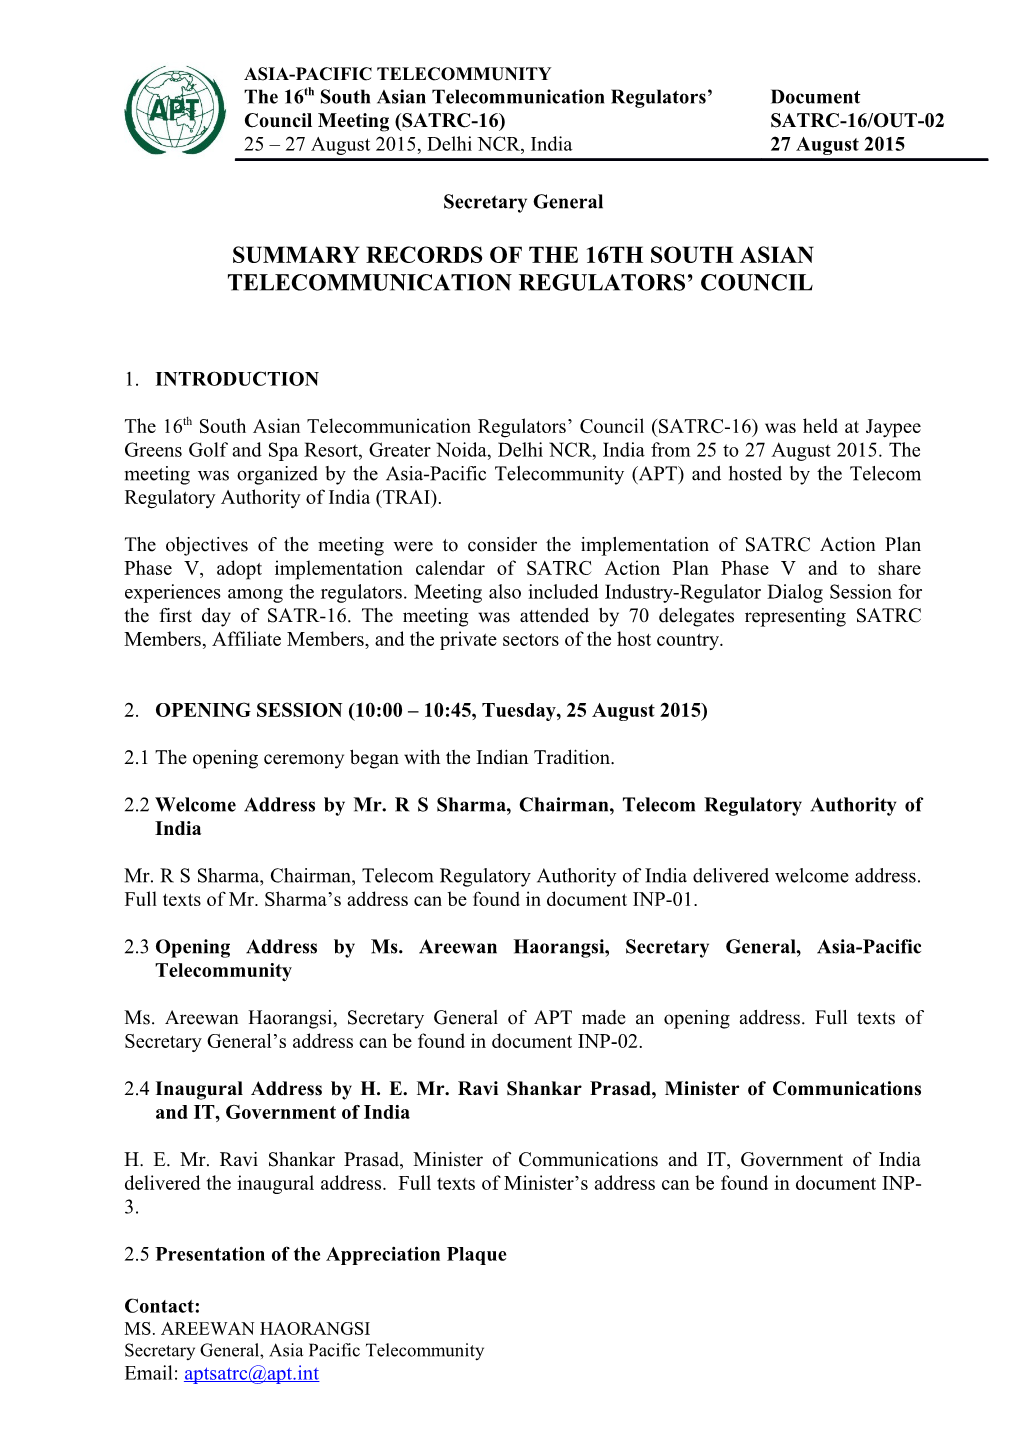 Summary Records of the 16Thsouth Asian Telecommunication Regulators Council